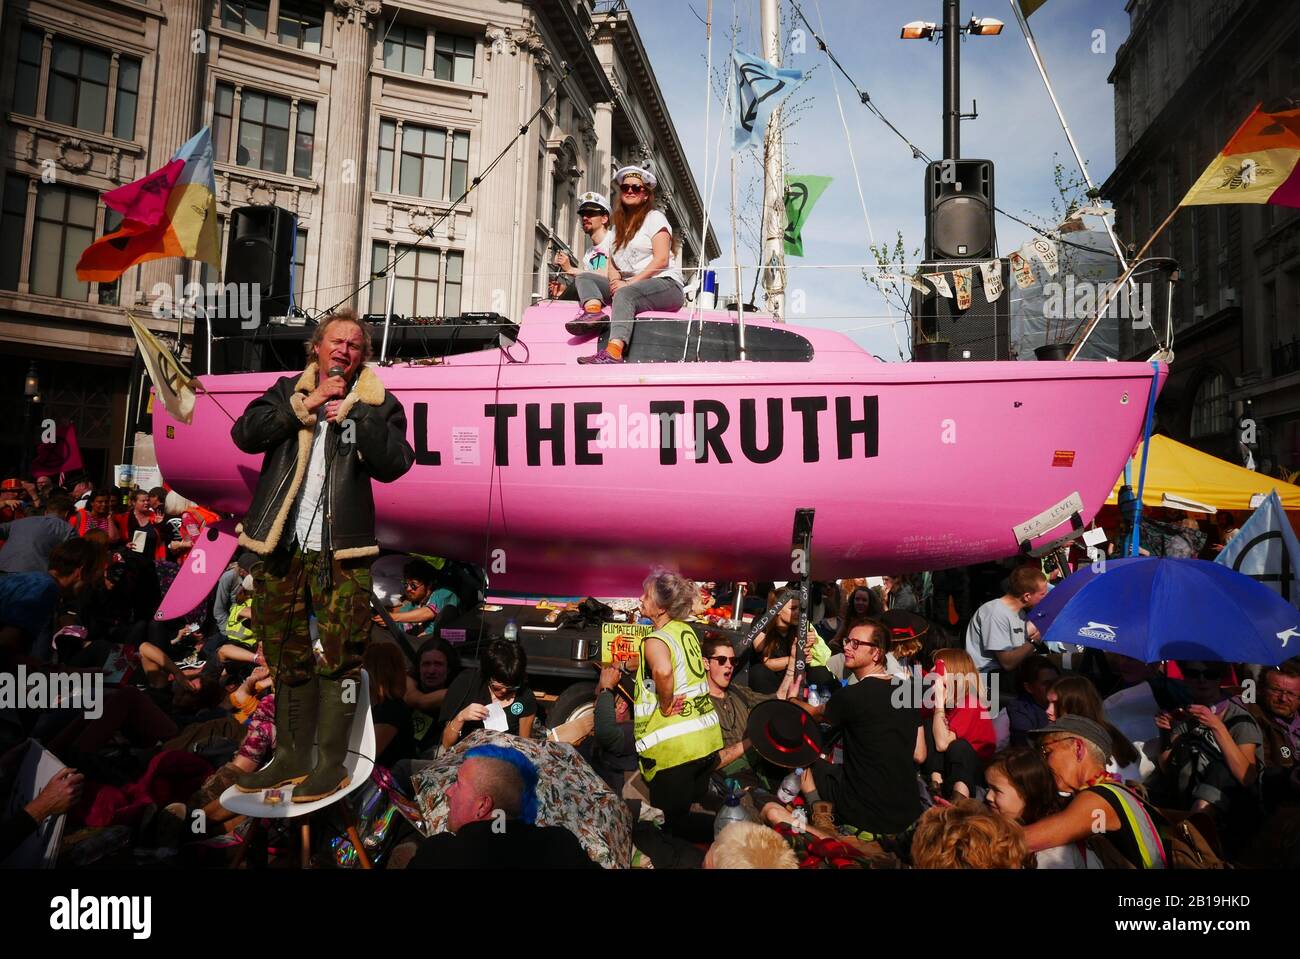 Extinction Rebellion, occupy London: Starting from Monday 15 April 2019, Extinction Rebellion organised demonstrations in London, focusing their attention on Oxford Circus, Marble Arch, Waterloo Bridge and the area around Parliament Square. Activists fixed a pink boat named after murdered Honduran environmental activist Berta Cáceres in the middle of the busy intersection of Oxford Street and Regent Street (Oxford Circus) and glued themselves to it and also set up several gazebos, potted plants and trees, a mobile stage and a skate ramp whilst also occupying Waterloo Bridge (ref:Wikipedia). Stock Photo